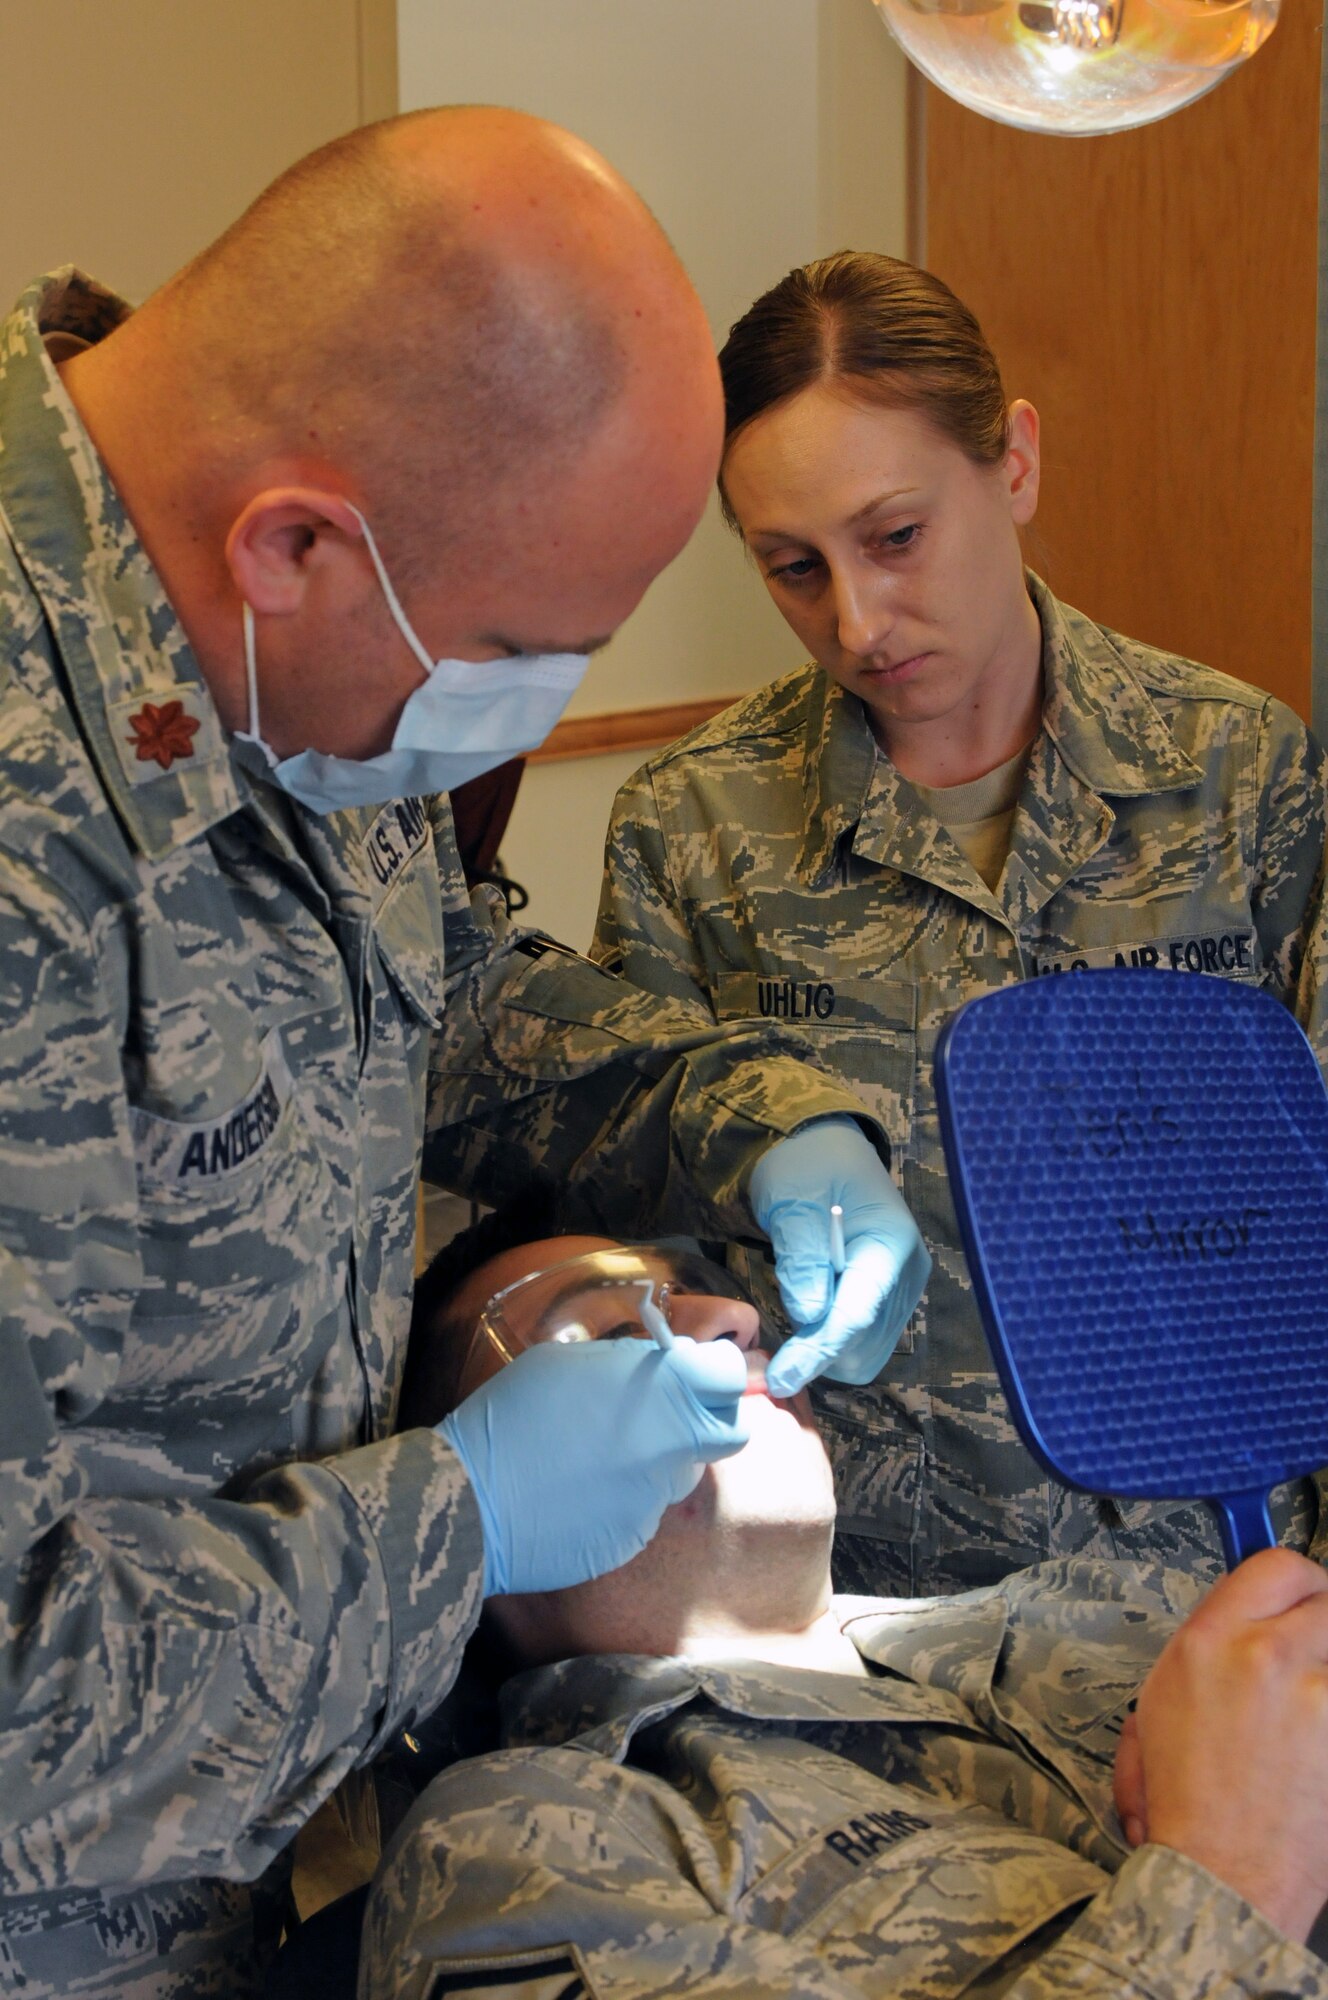 Major Paul Anderson, 173rd Medical Group, performs a routine dental exam on Master Sgt. Vaughn Rains, 173rd Security Forces Squadron, with assistance from Tech. Sgt. Barbara Uhlig, at Kingsley Field, Klamath Falls, Ore., April 6, 2013. (U.S. Air National Guard photo by Airman 1st Class Penny Hamilton)